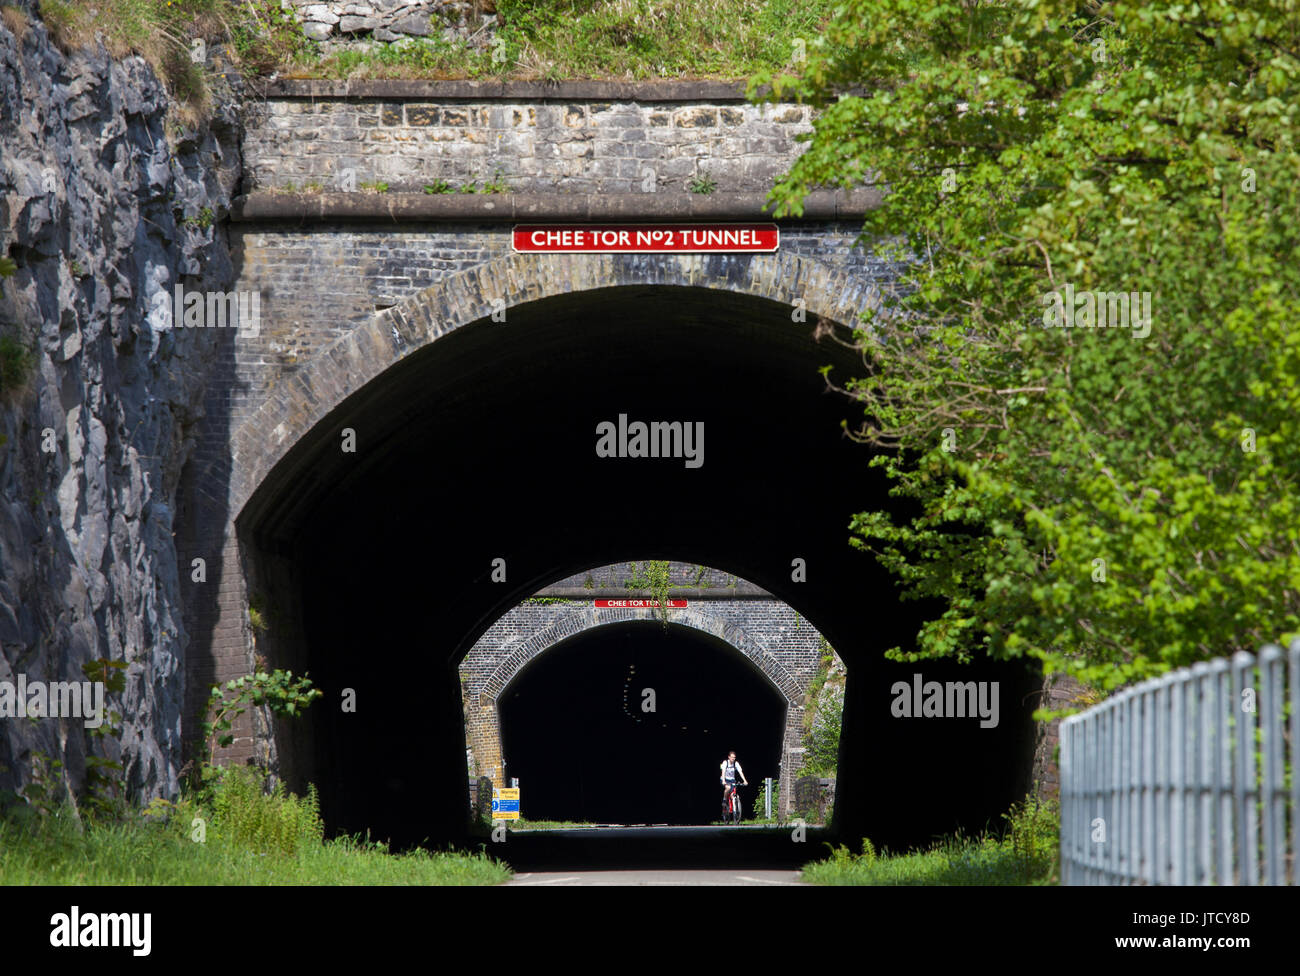 Chee Tor Tunnel No 2, Monsal Trail, cyclist and walkers route, Peak District Stock Photo